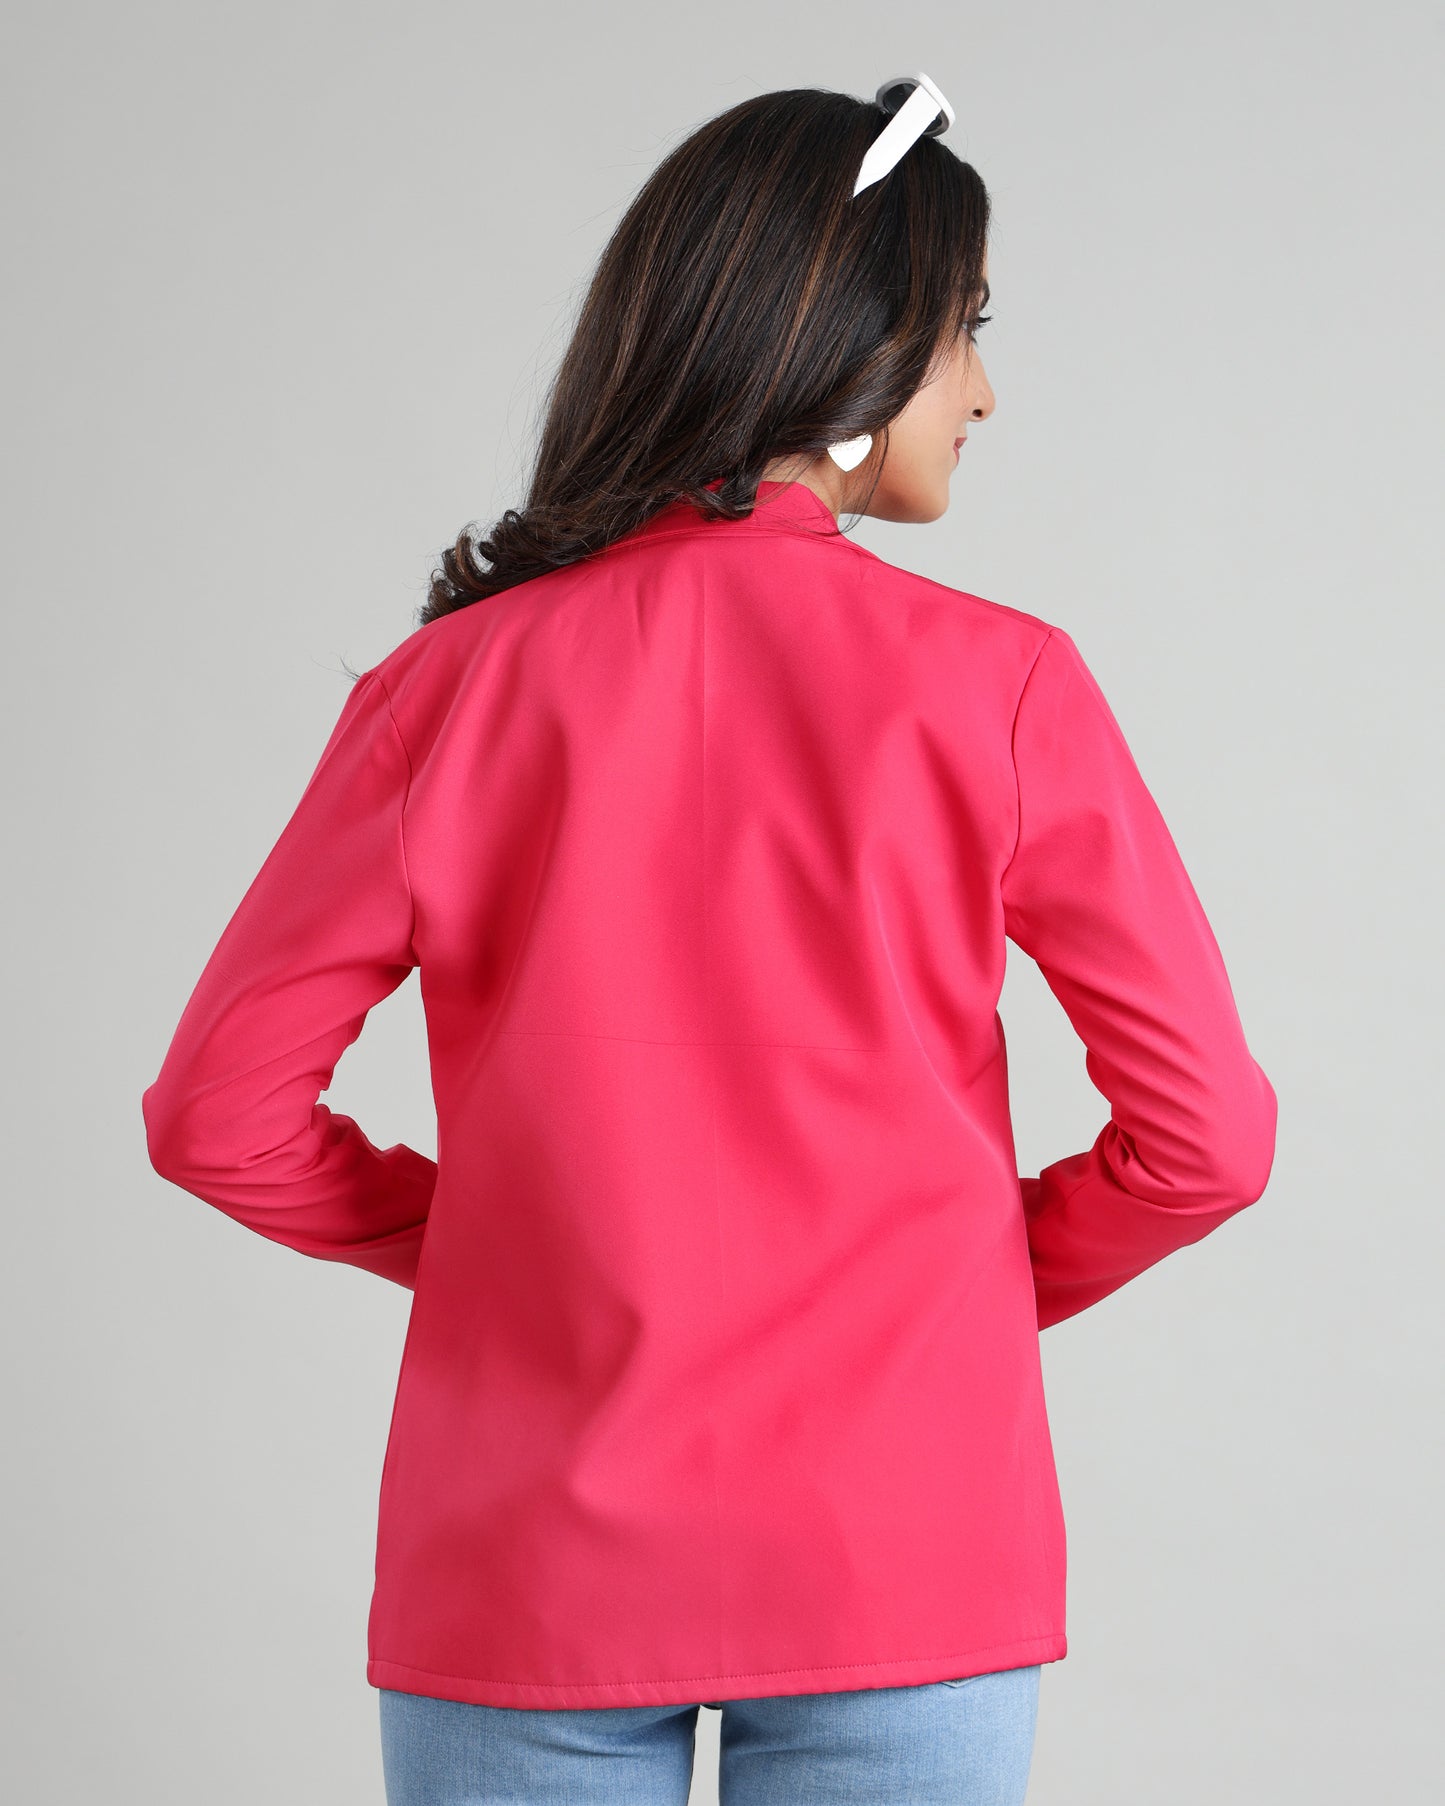 The Women's Classic Soft Touch Jacket 